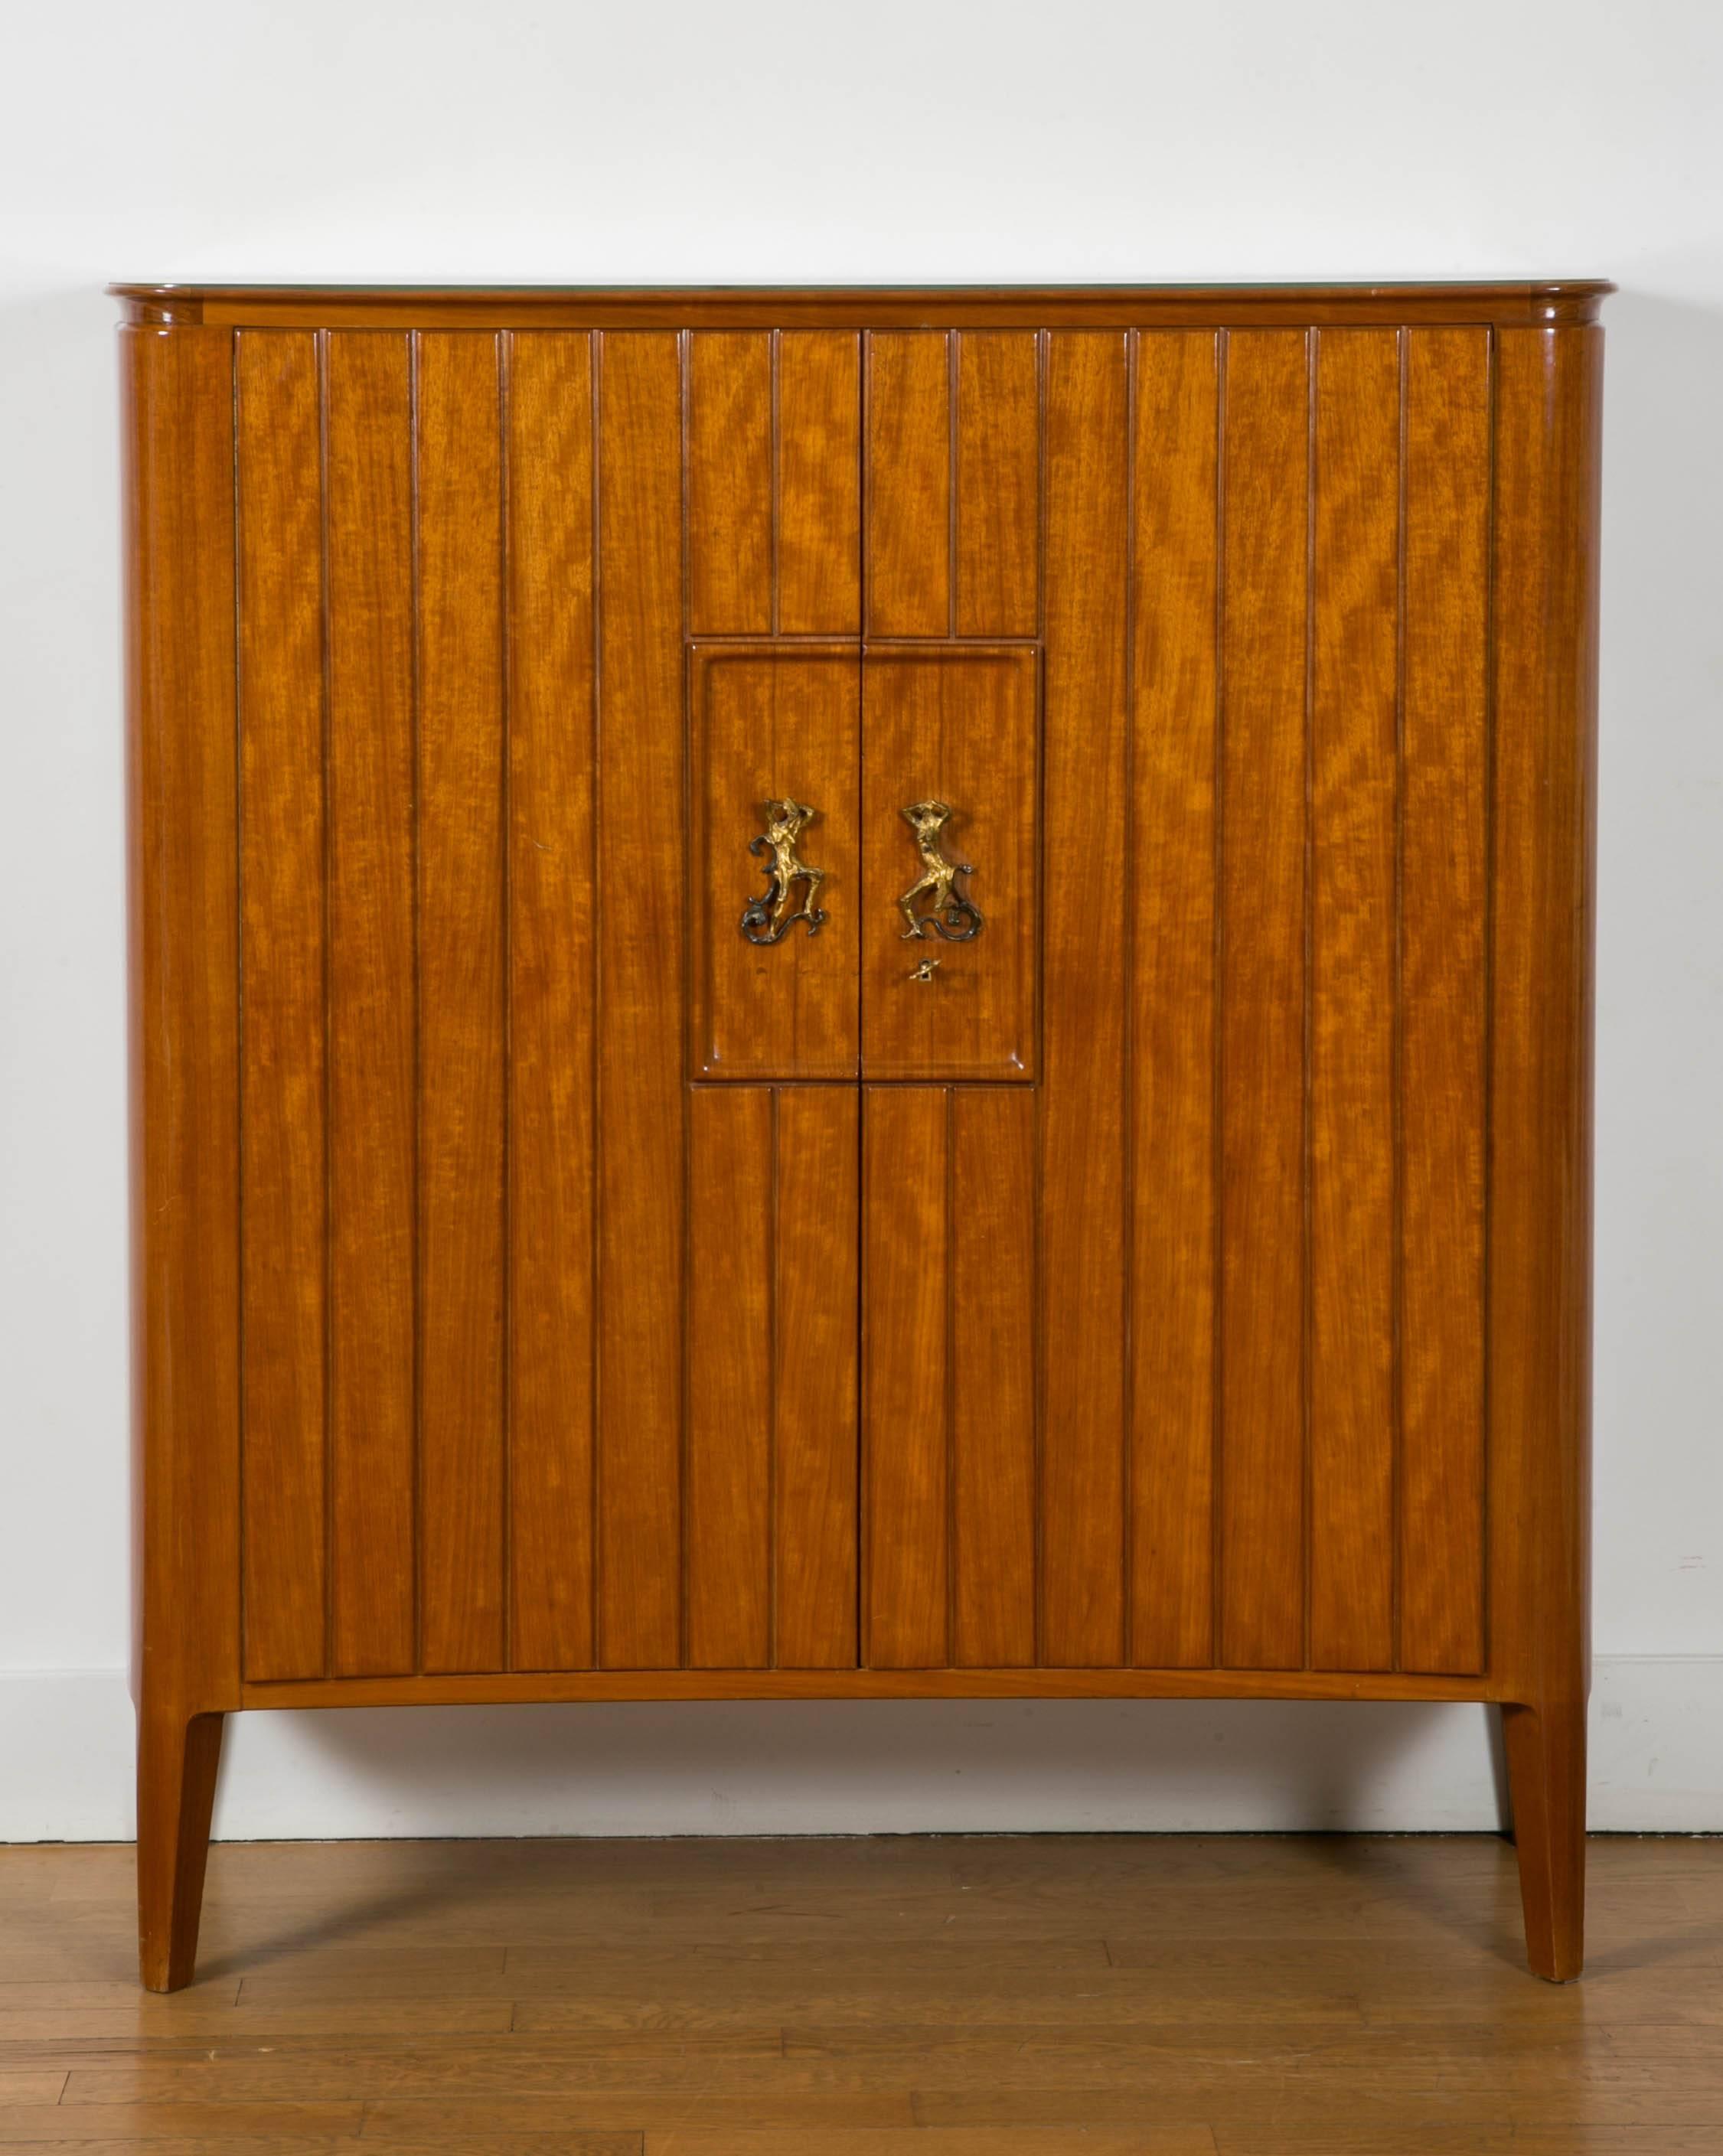 Elegant mahogany cabinet, 1945-1950, by Osvaldo Borsani, Italy.
With central gilt bronze ornament by Lucio Fontana.
Gold leaf glass top. Sycamore inside with drawers and shelves.
Label. 
Original lightly curved piece, with sculpted handles.